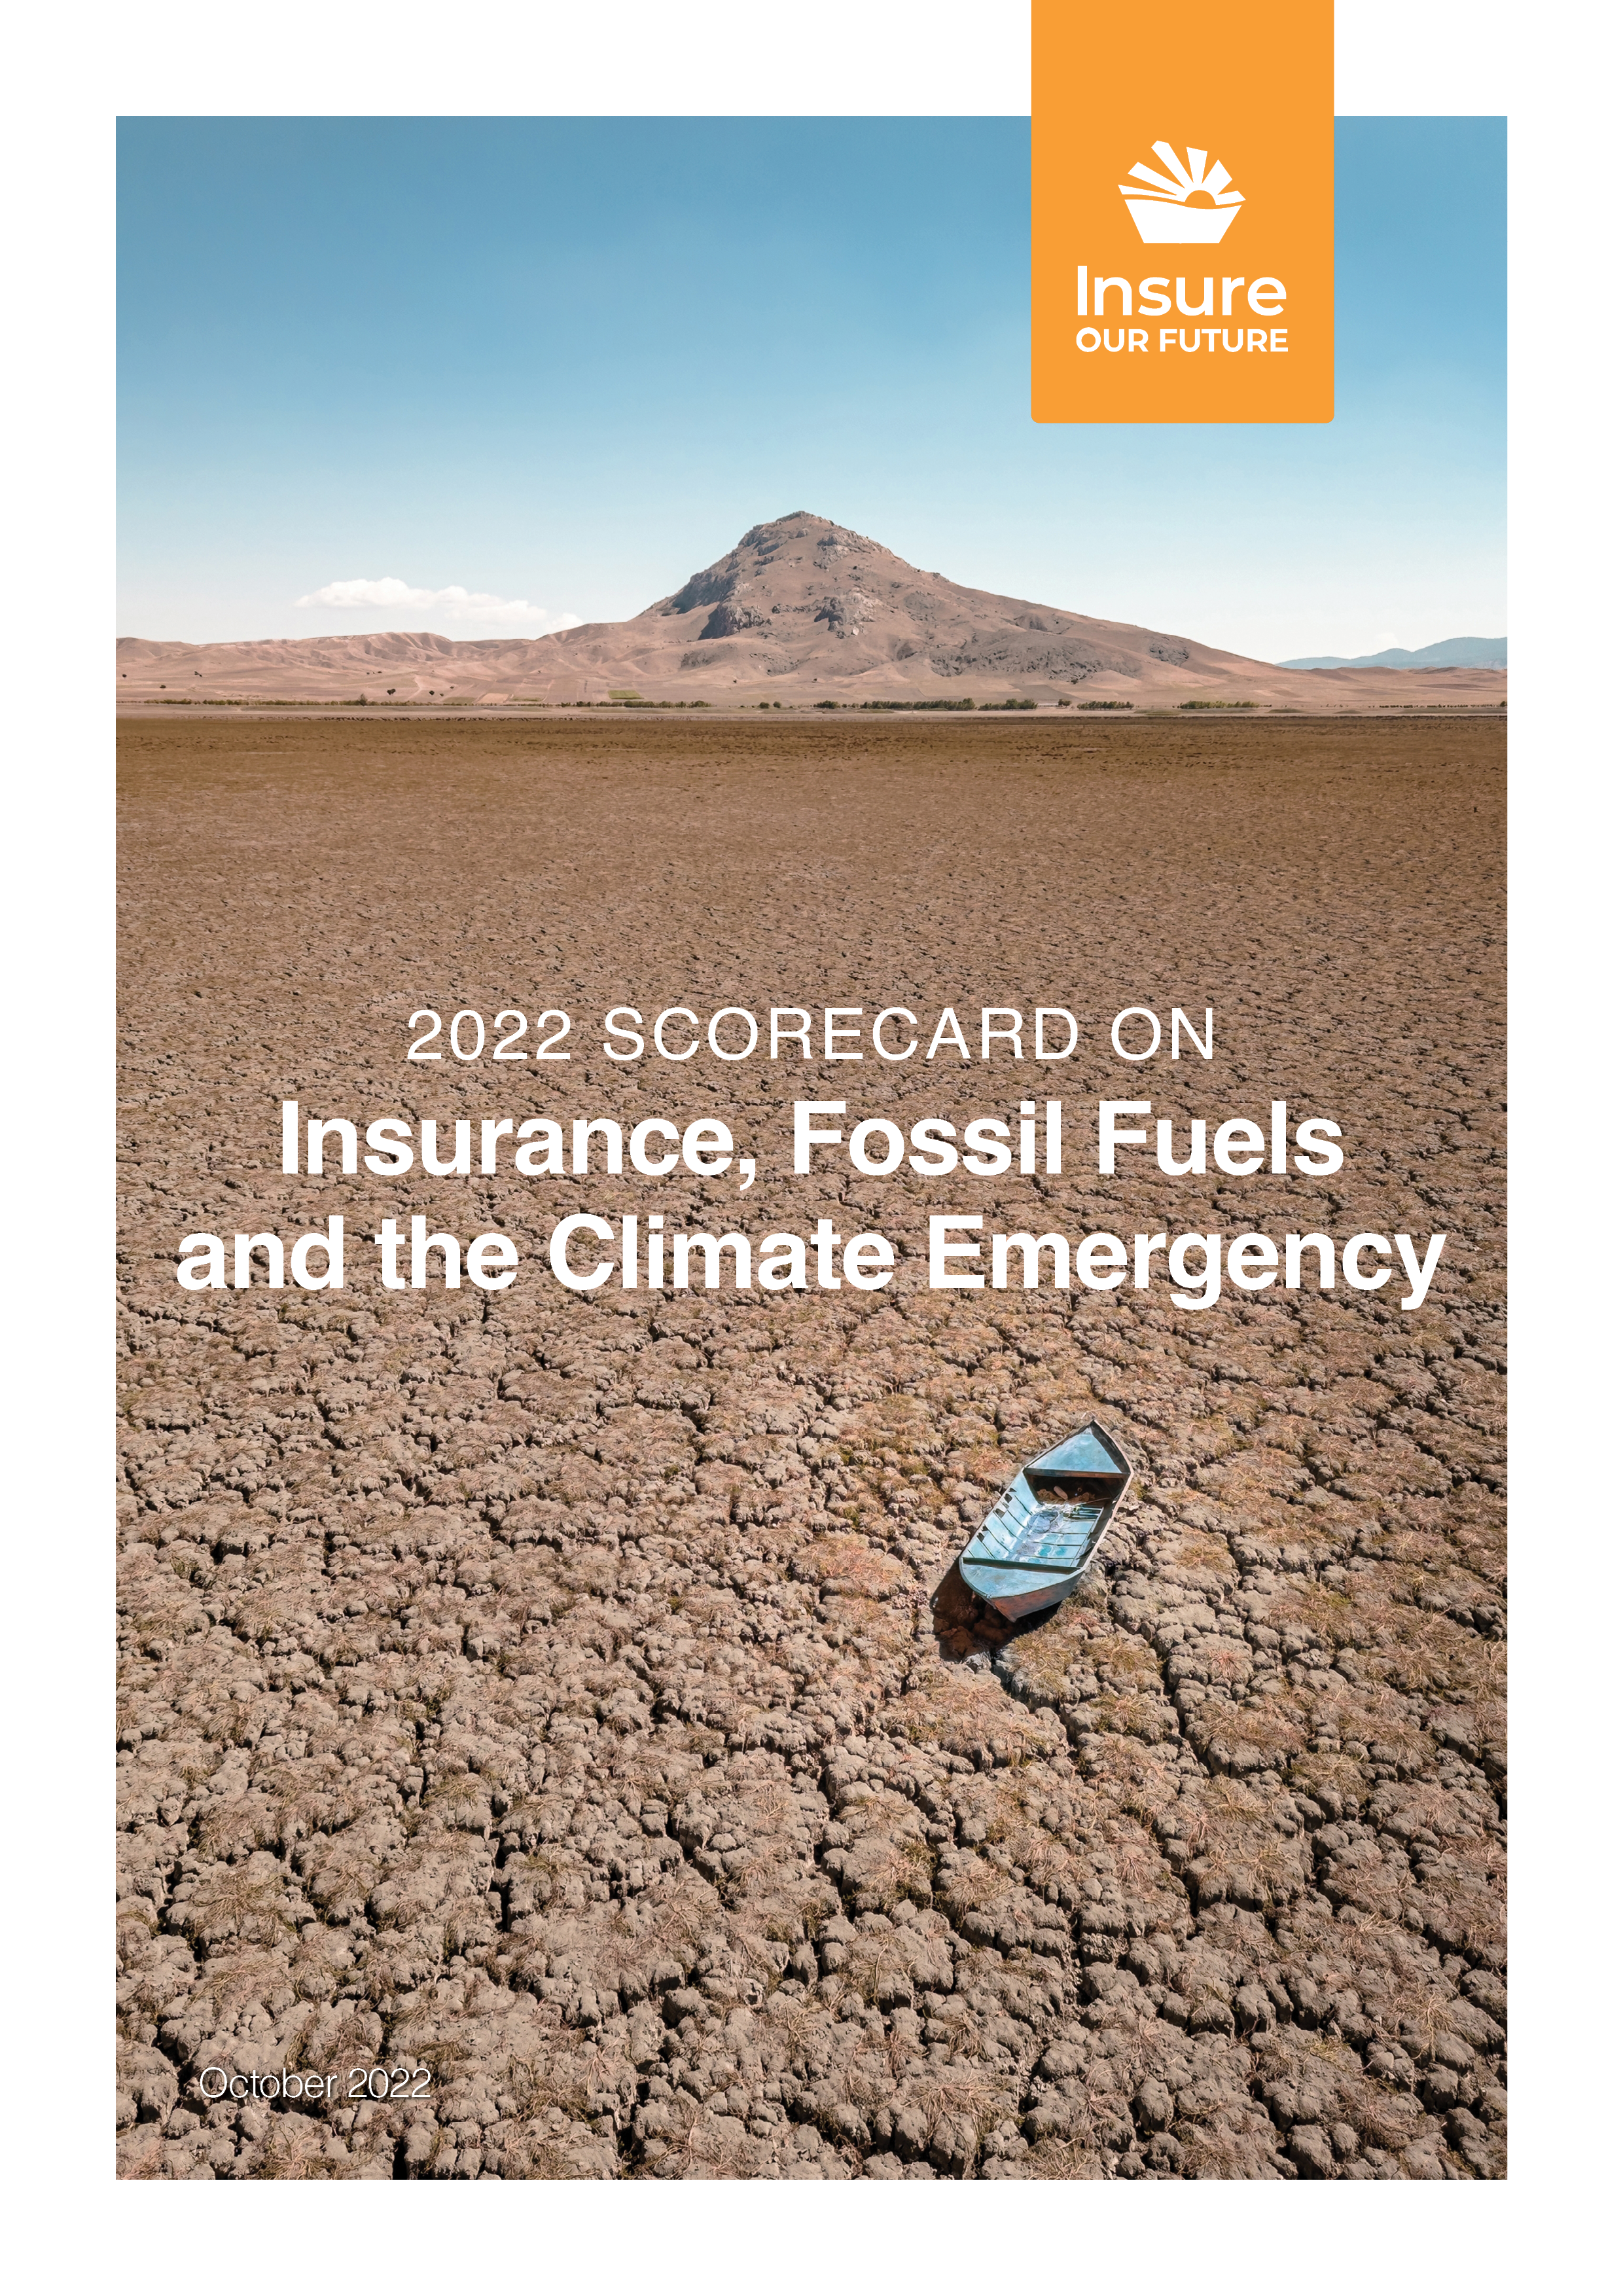 2022 Scorecard on Insurance, Fossil Fuels, and the Climate Emergency